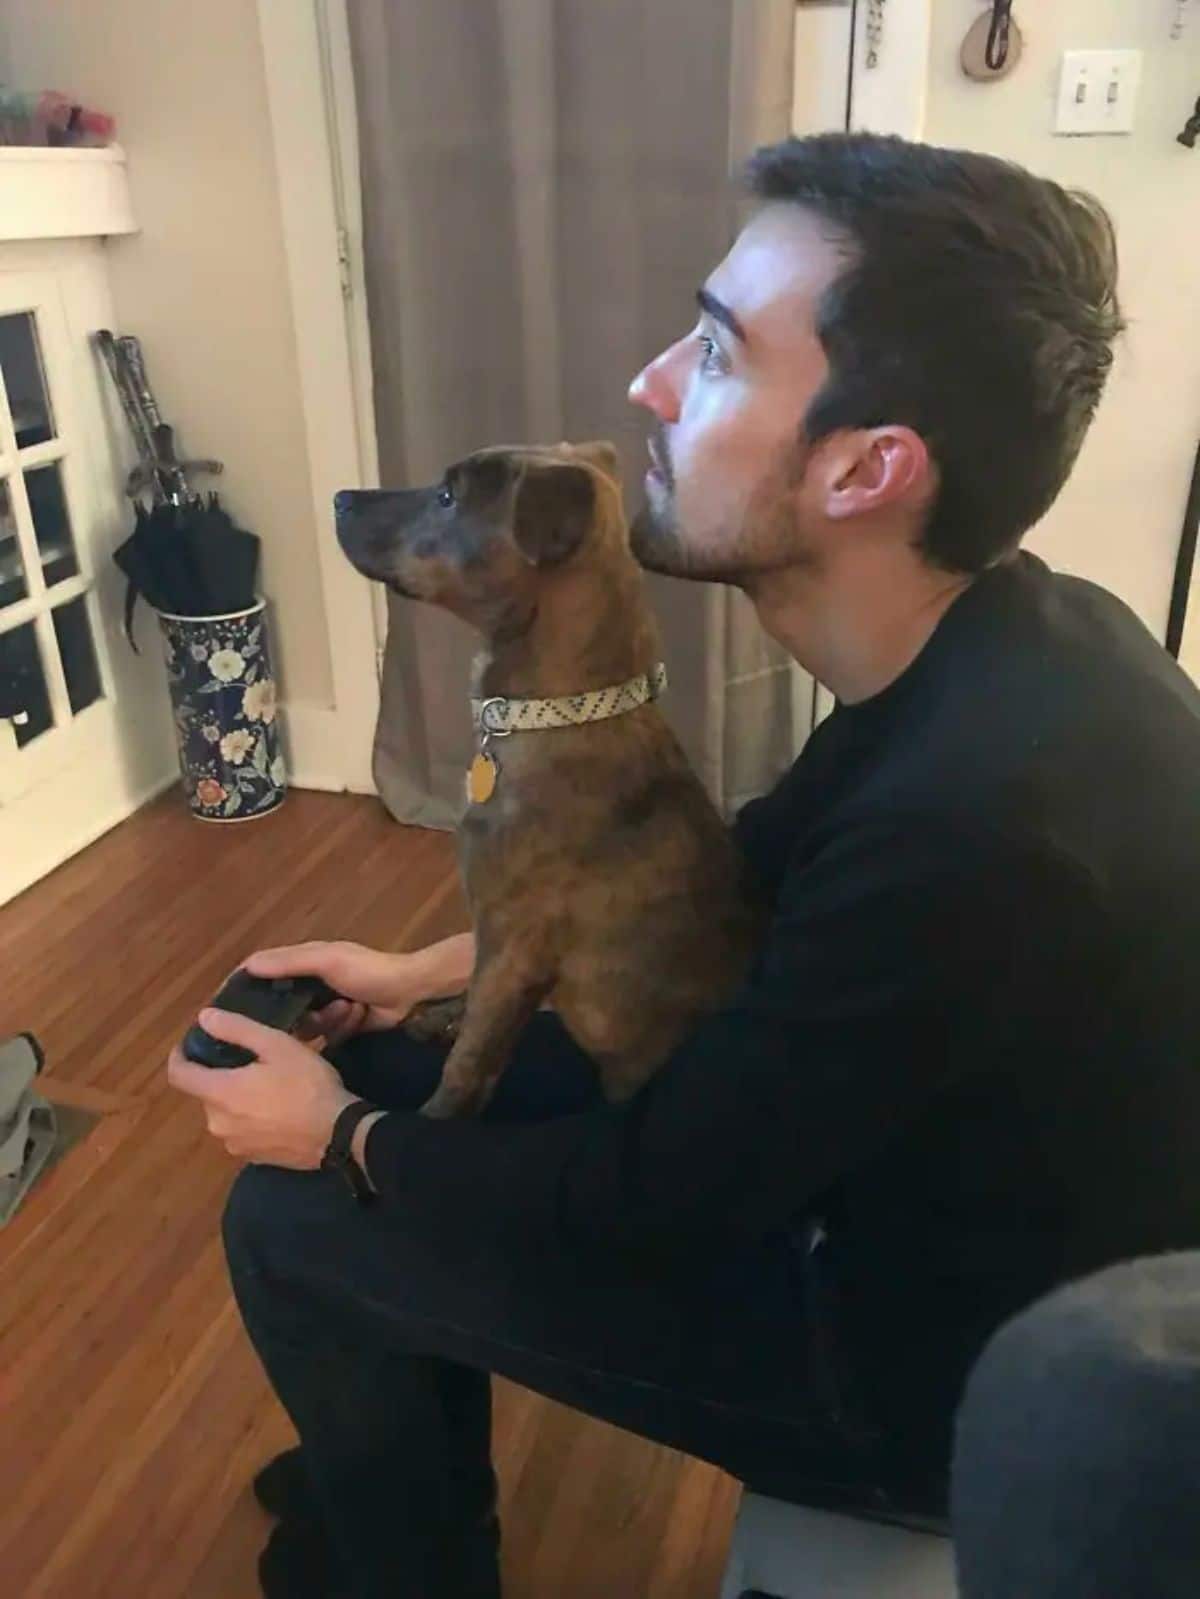 brown dog sitting on a man's lap while the man is playing a game